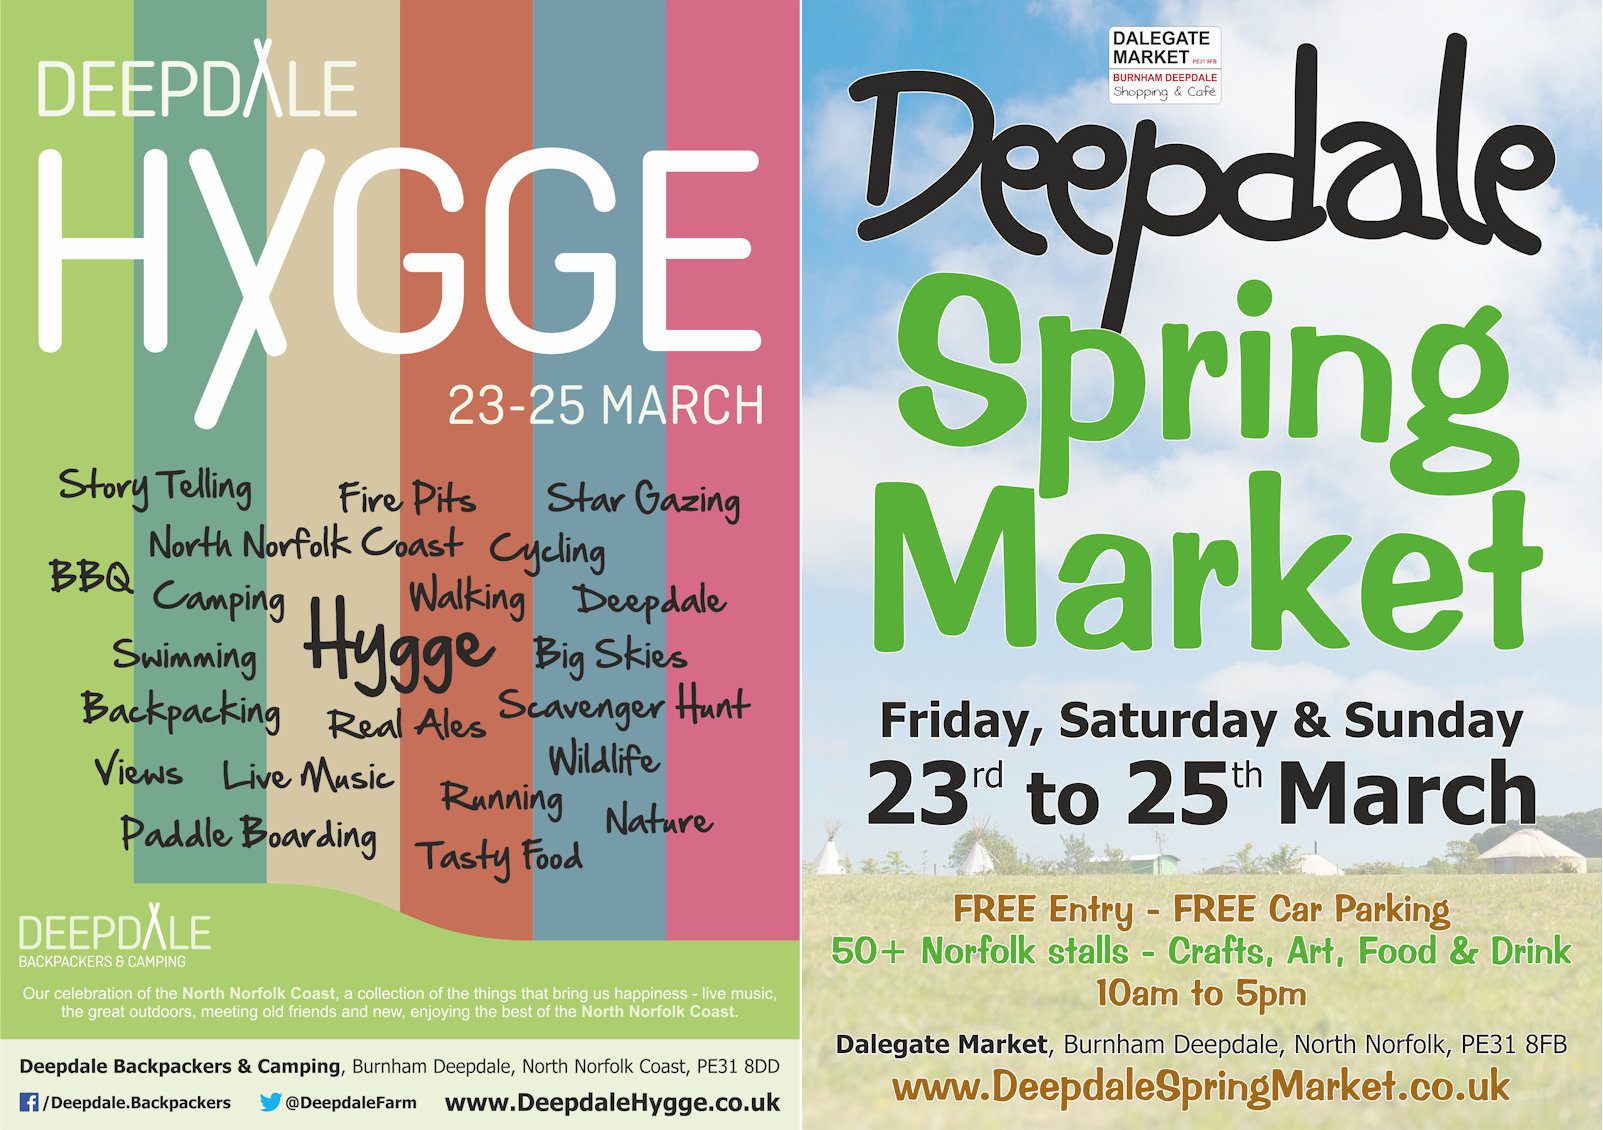 Deepdale Hygge and Deepdale Spring Market | Friday 23rd & Sunday 25th March 2018